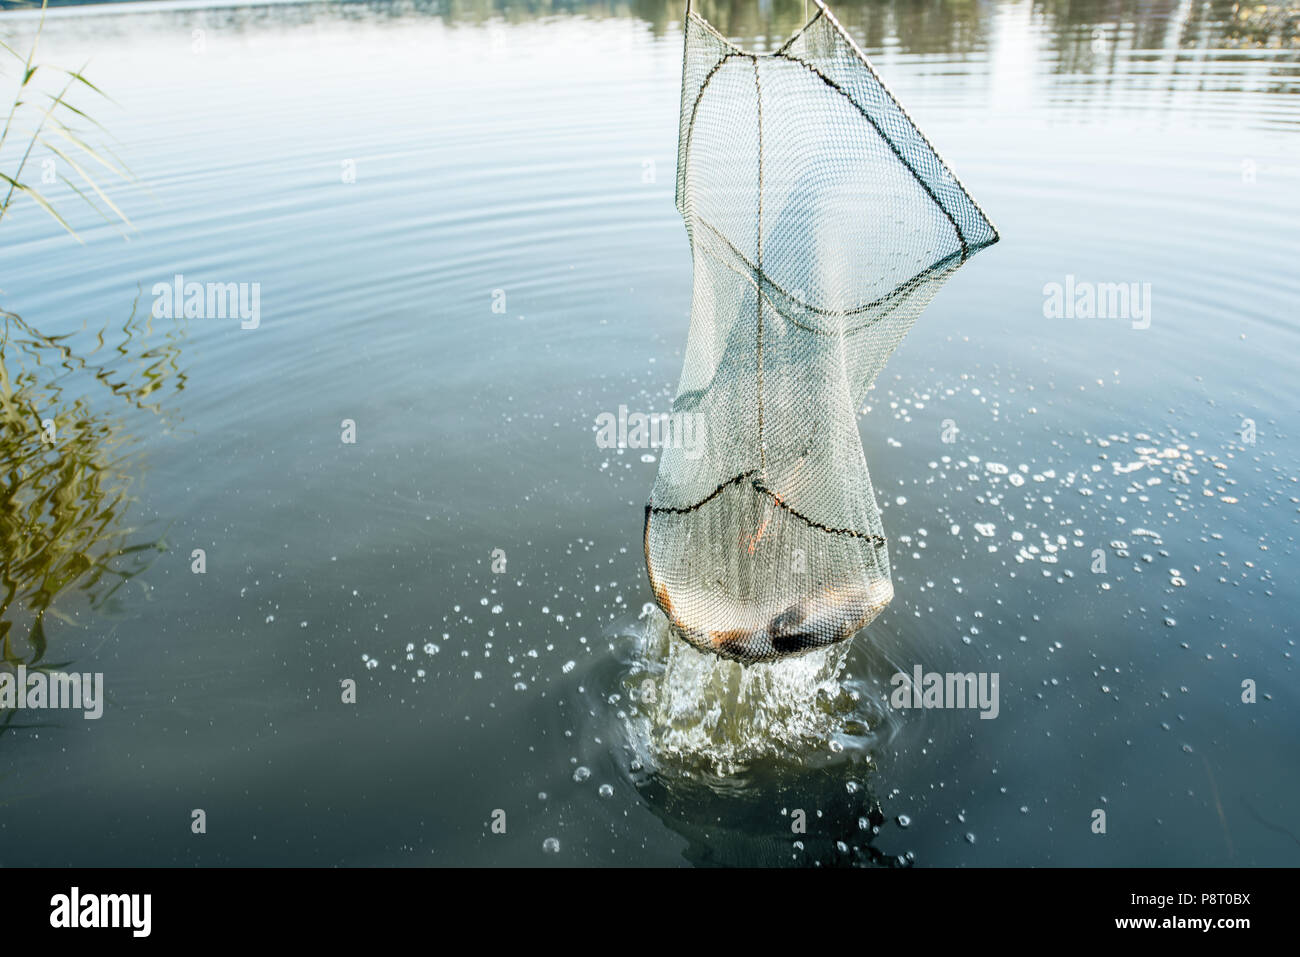 Catching fish with fishing net in the lake during the morning light Stock  Photo - Alamy